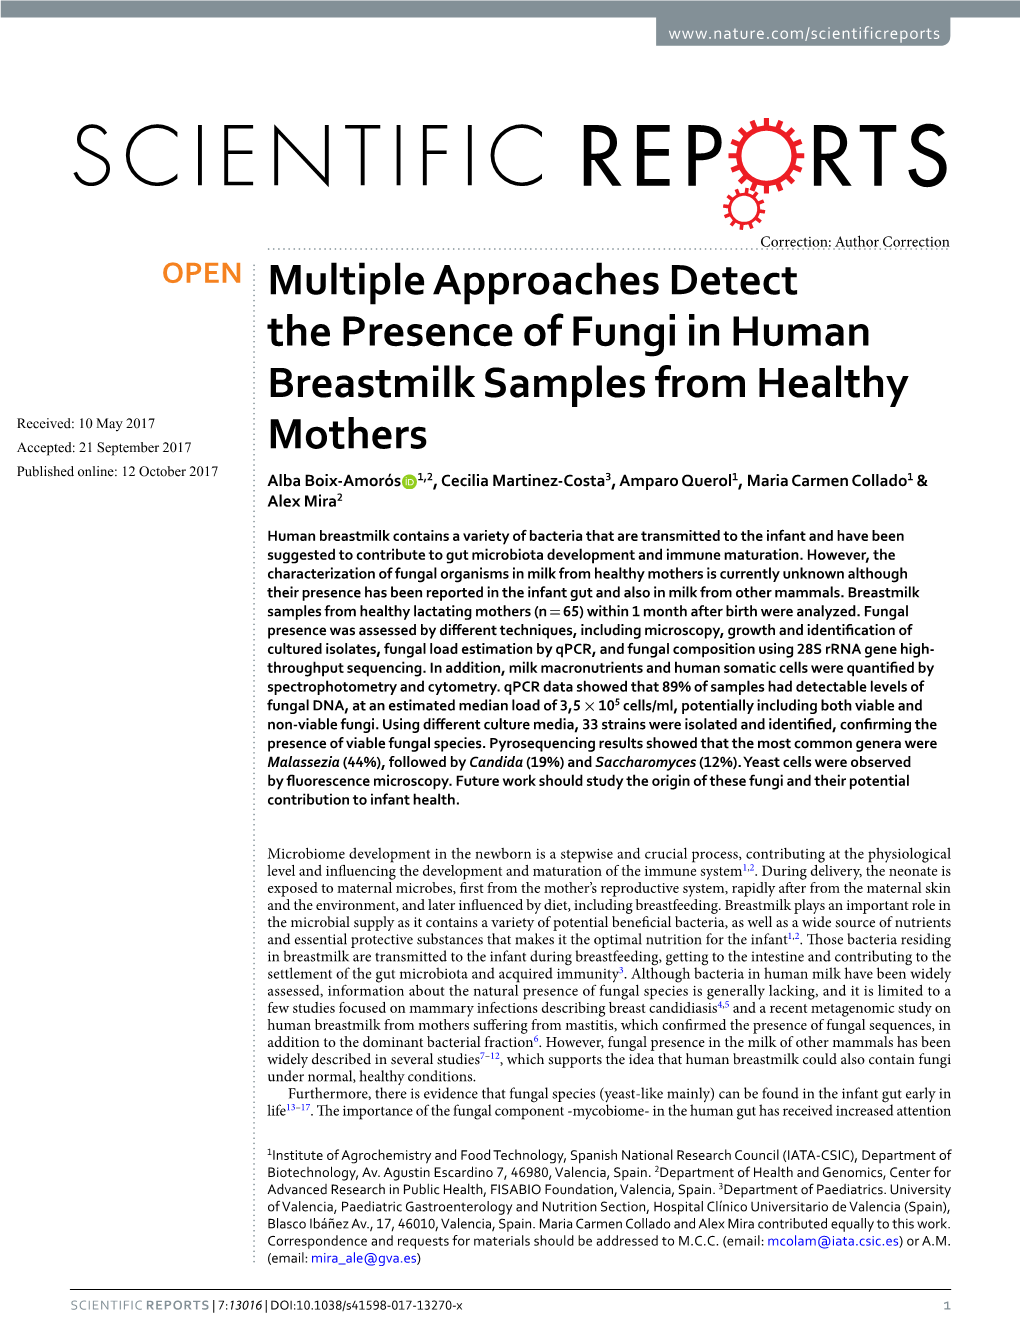 Multiple Approaches Detect the Presence of Fungi in Human